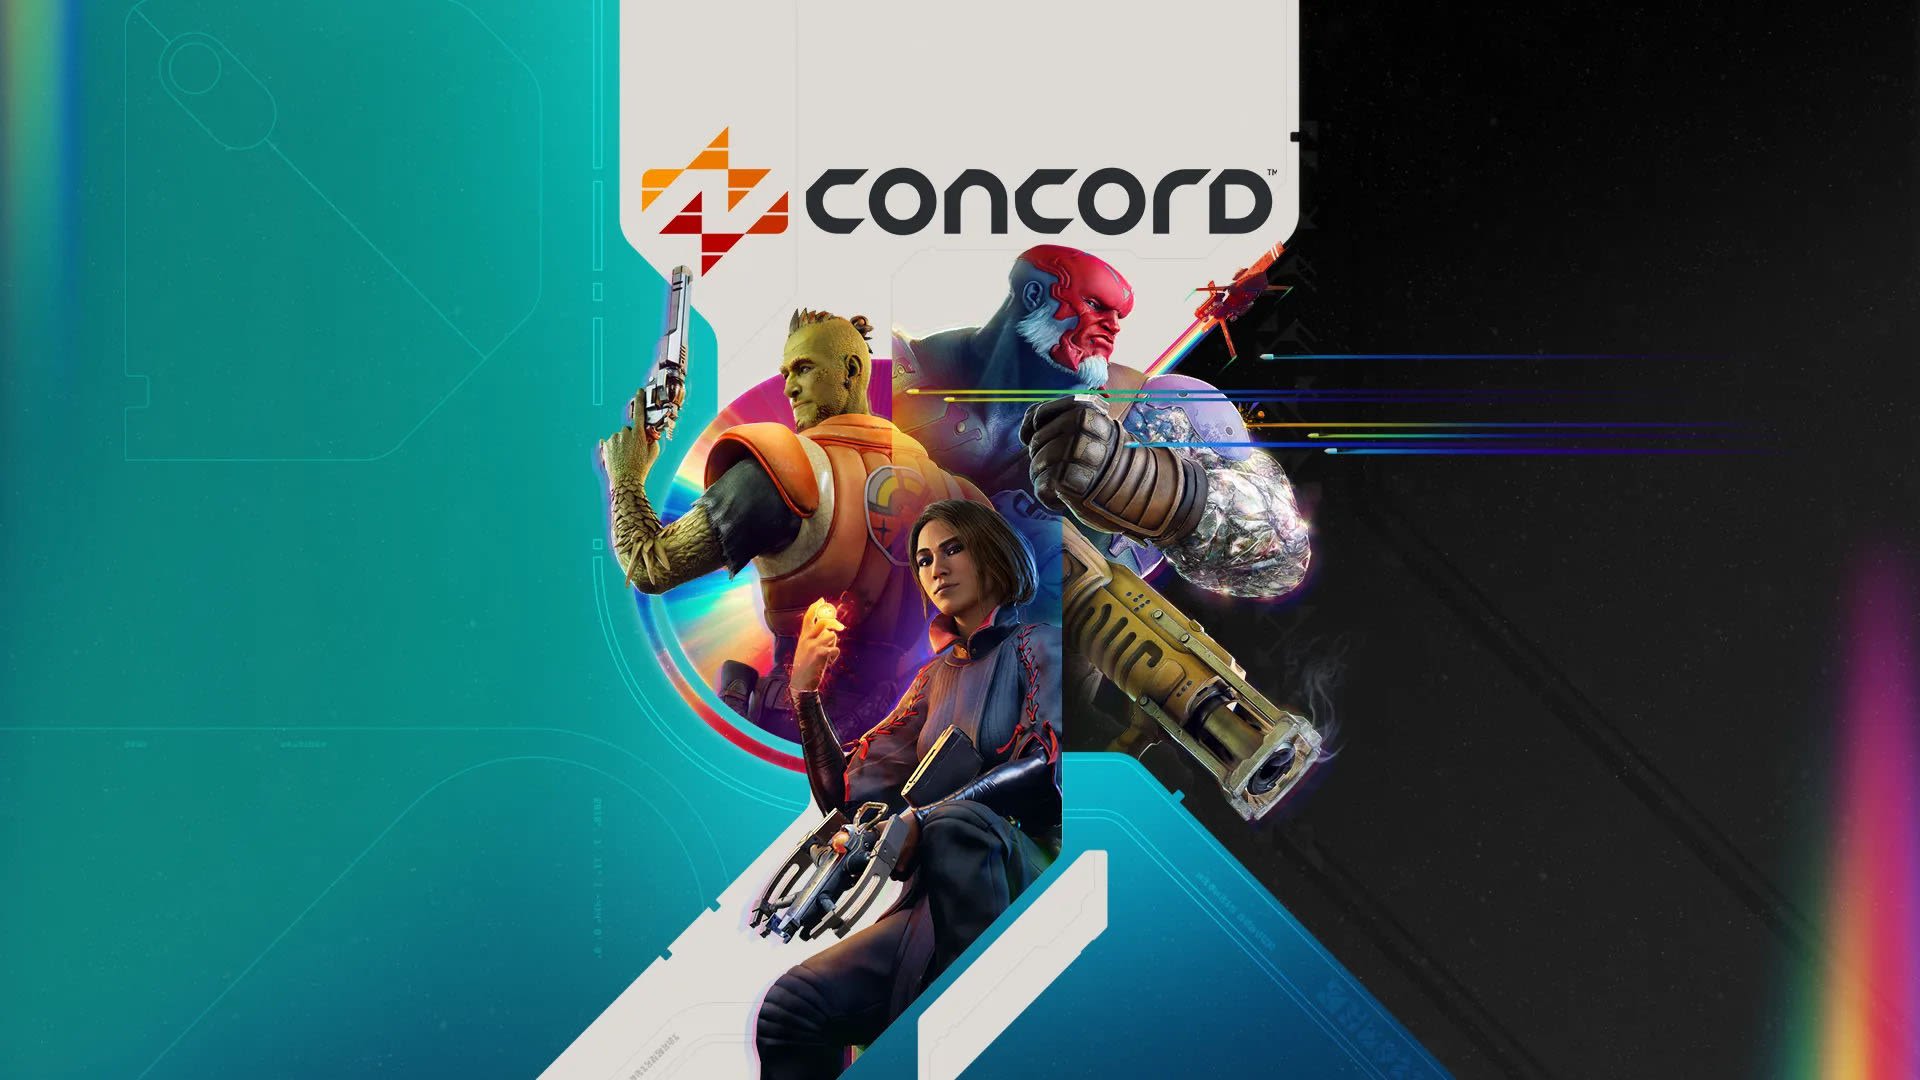 Concord launches August 23